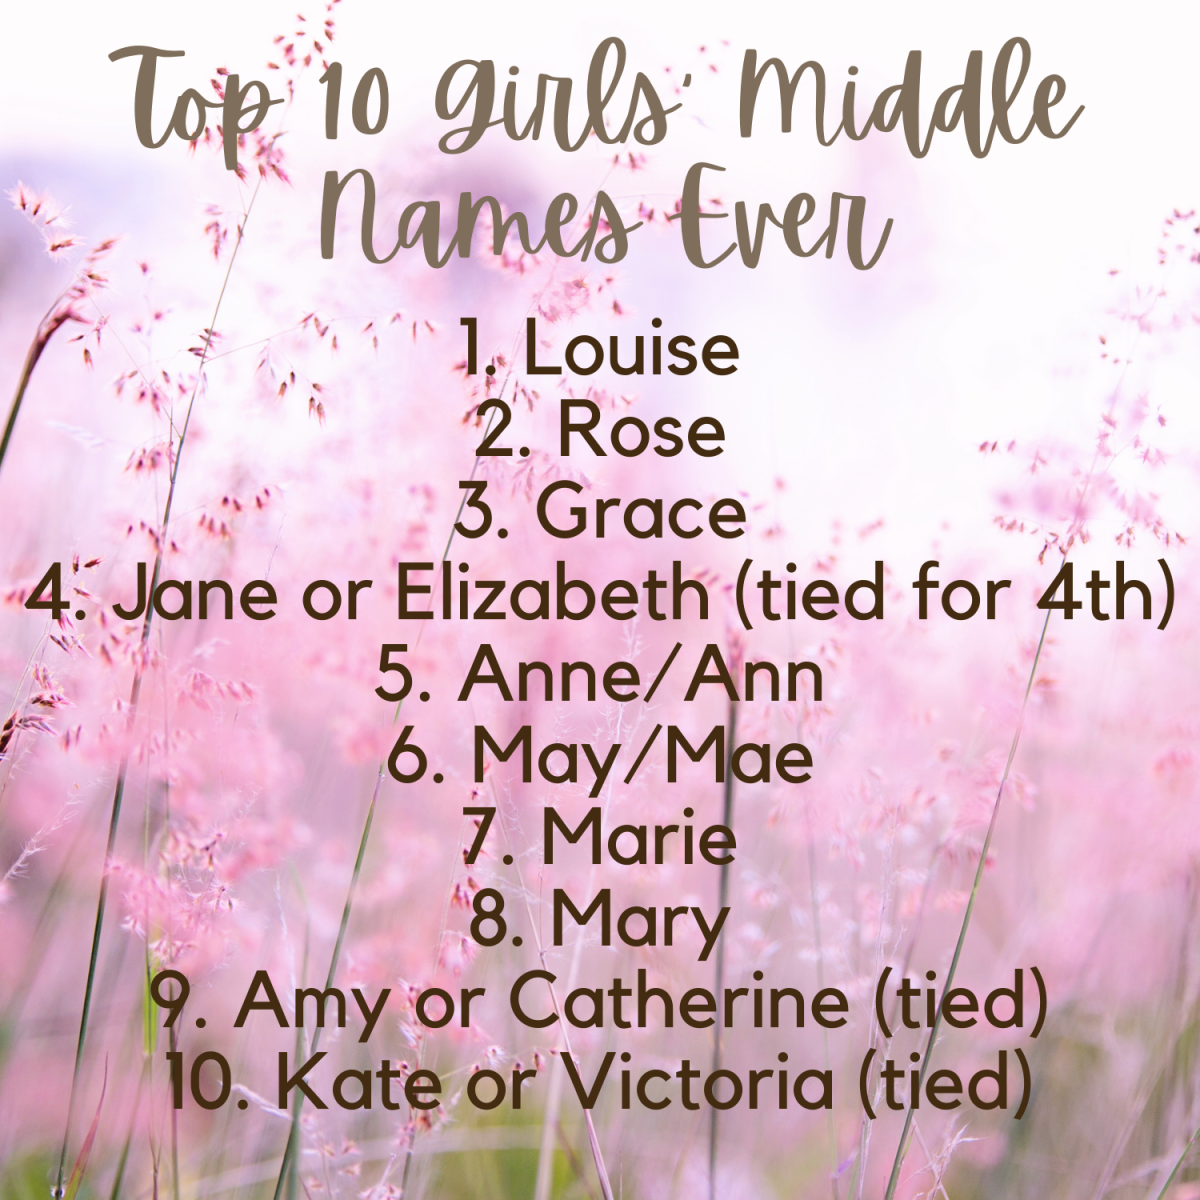 The top 10 most popular girls' last names ever, according to a study conducted by Ancestry.com.